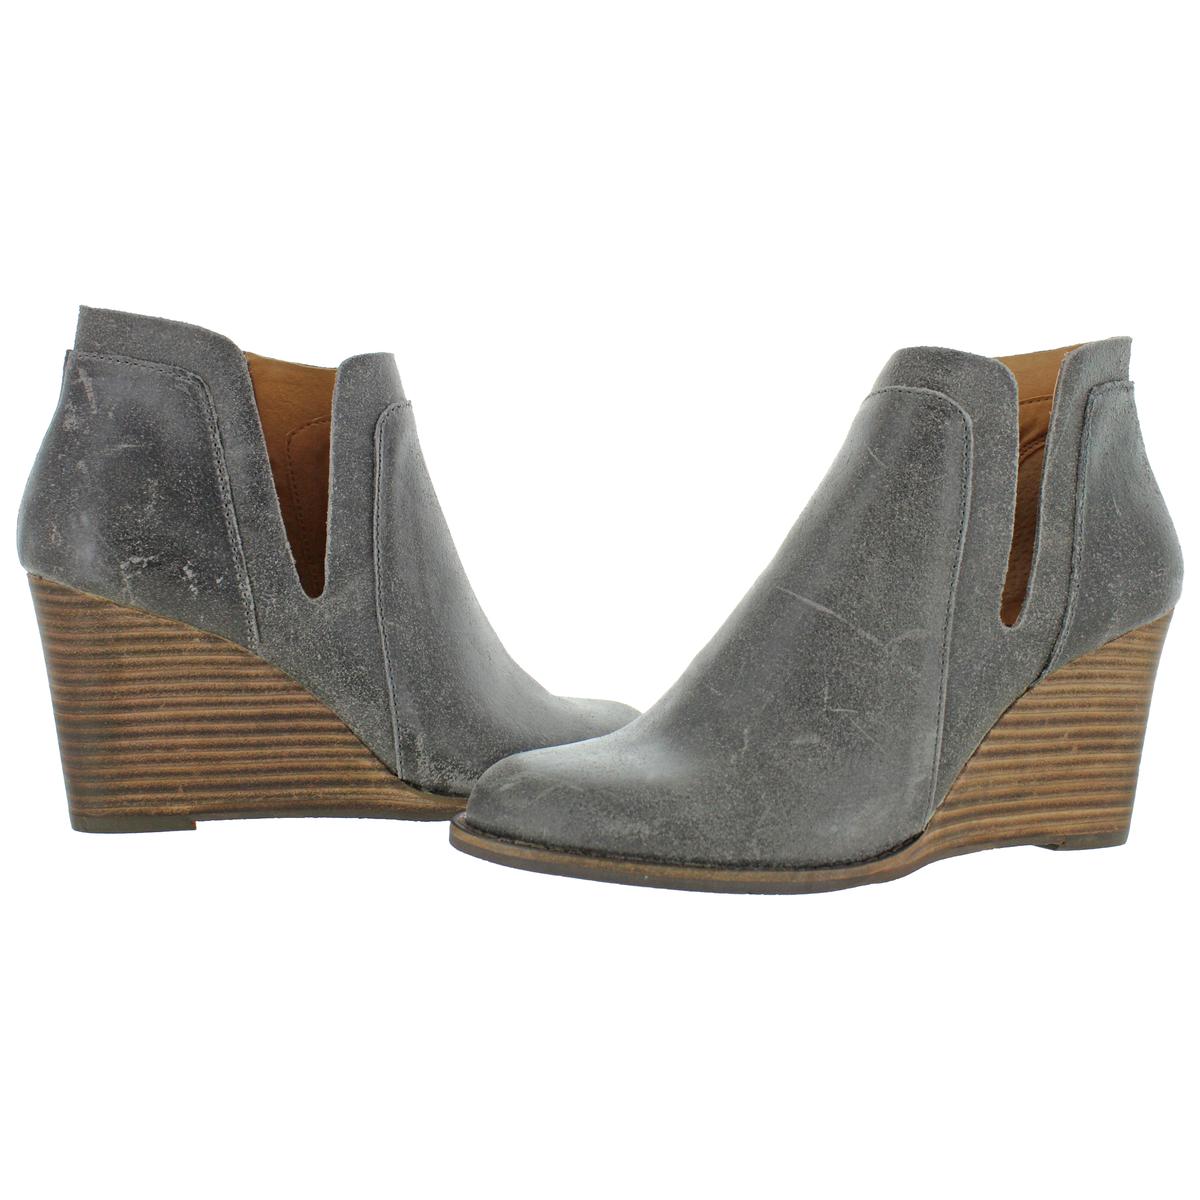 Yabba Stacked Wedge Ankle Bootie | eBay